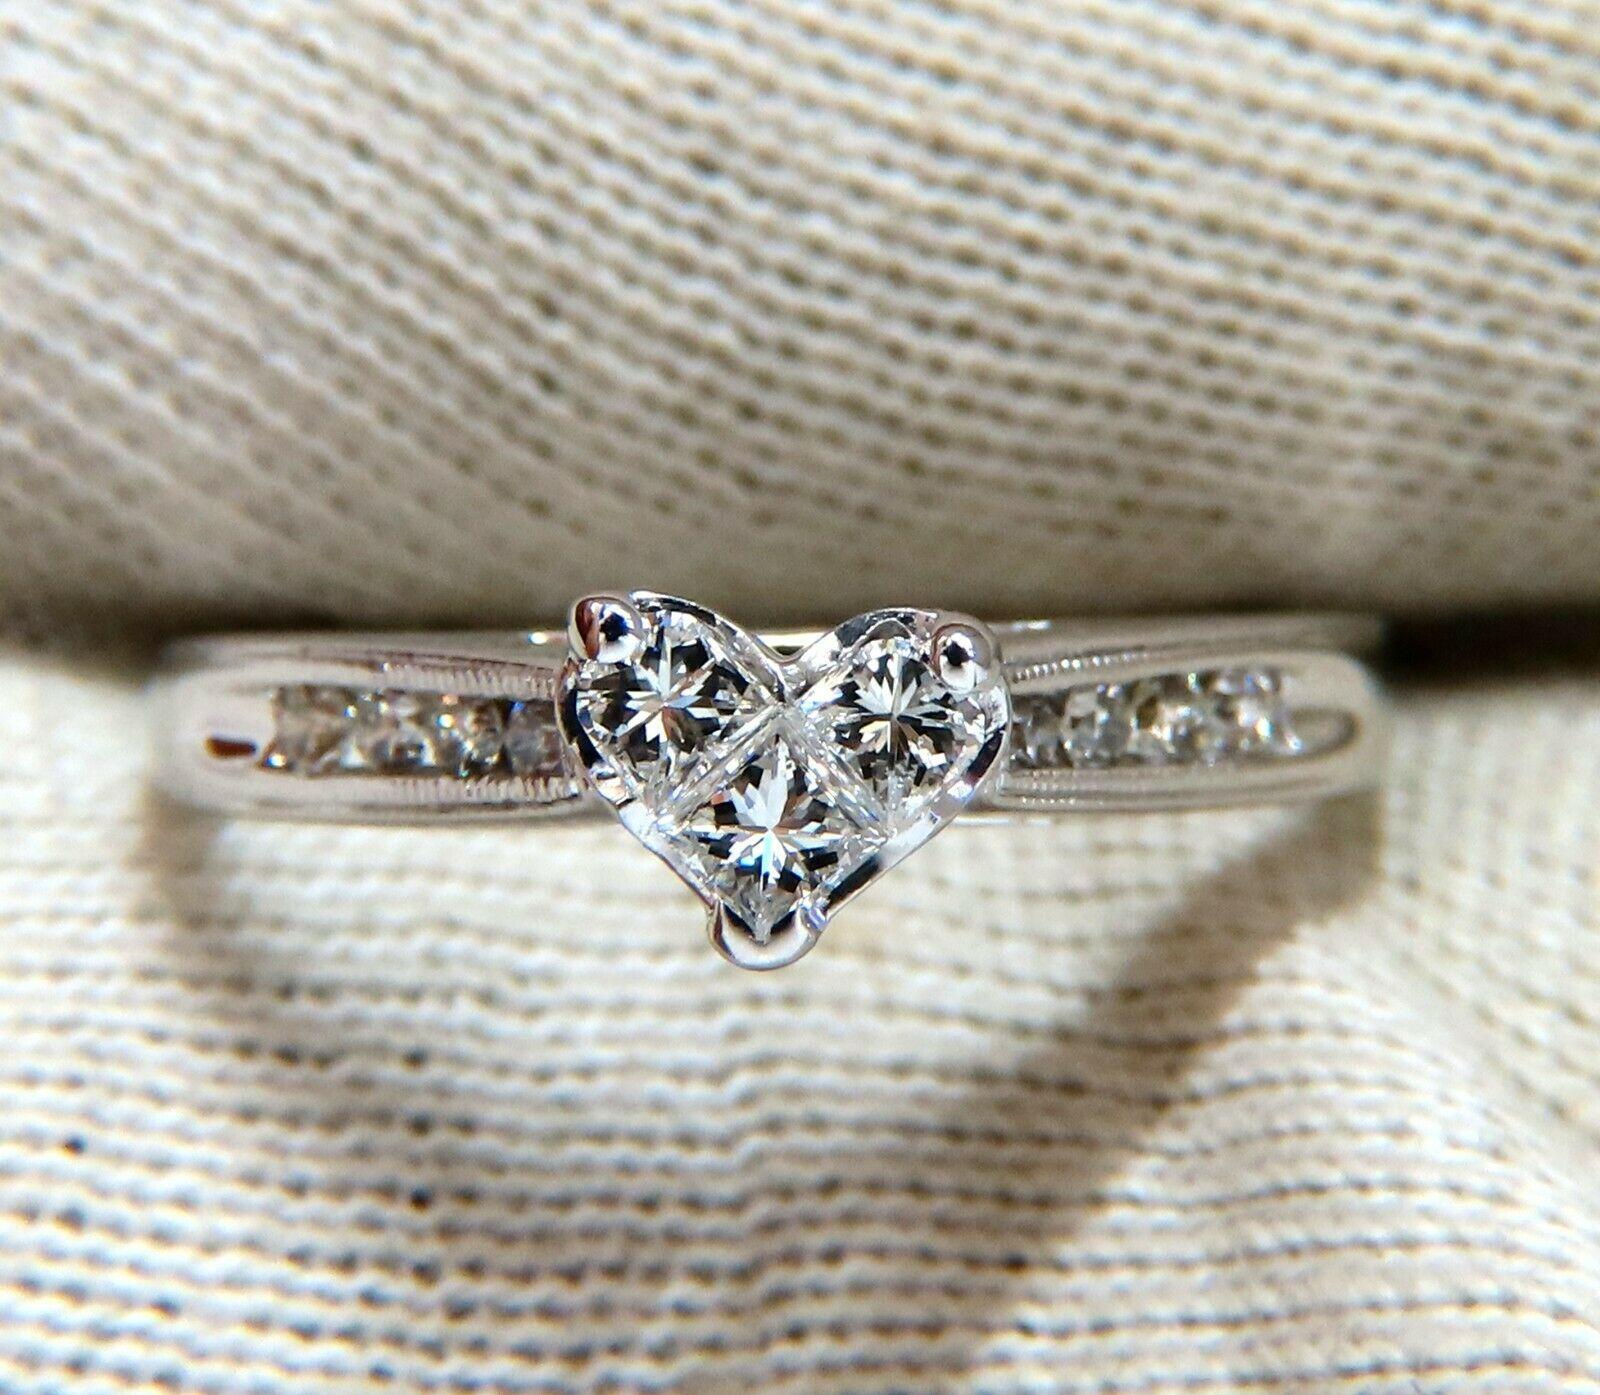 Princess Cut Cluster Heart 

(Three Diamonds Fused Together)

.60ct Natural Princess & Round Diamonds 

Vs-2 clarity H color.

14kt white gold

2.8 Grams

Overall ring: 5.6 mm (Heart)

Depth: 7.5mm

Current ring size: 8

May professionally resize,